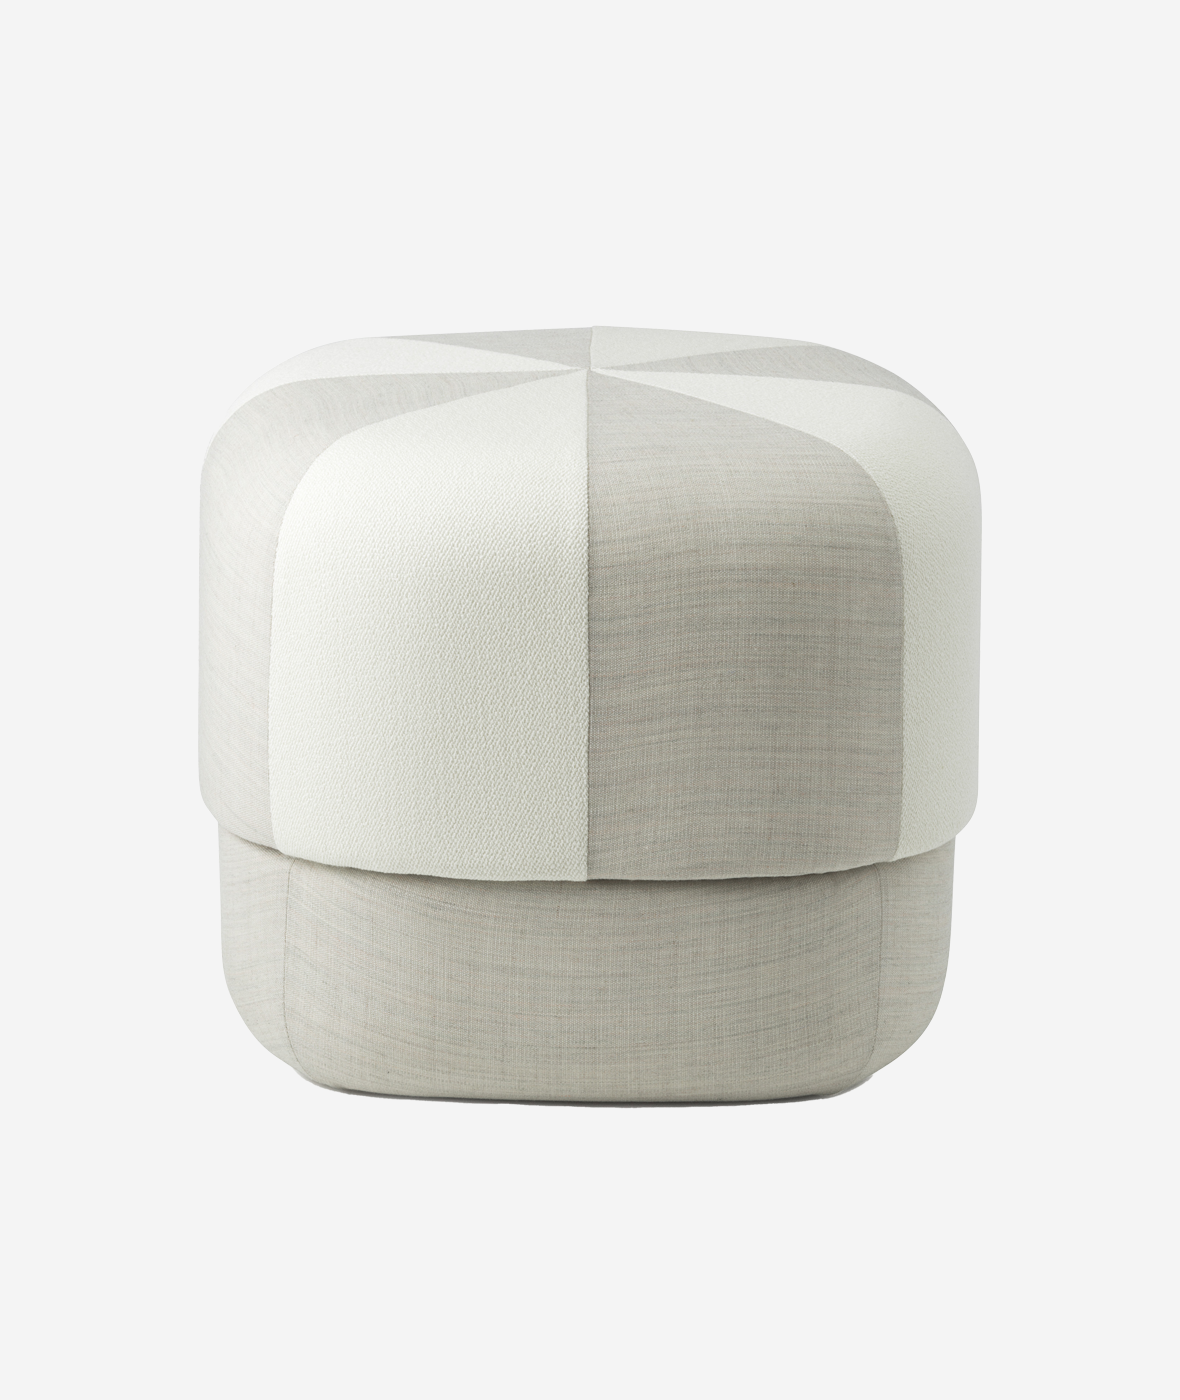 Circus Pouf Duo - More Options